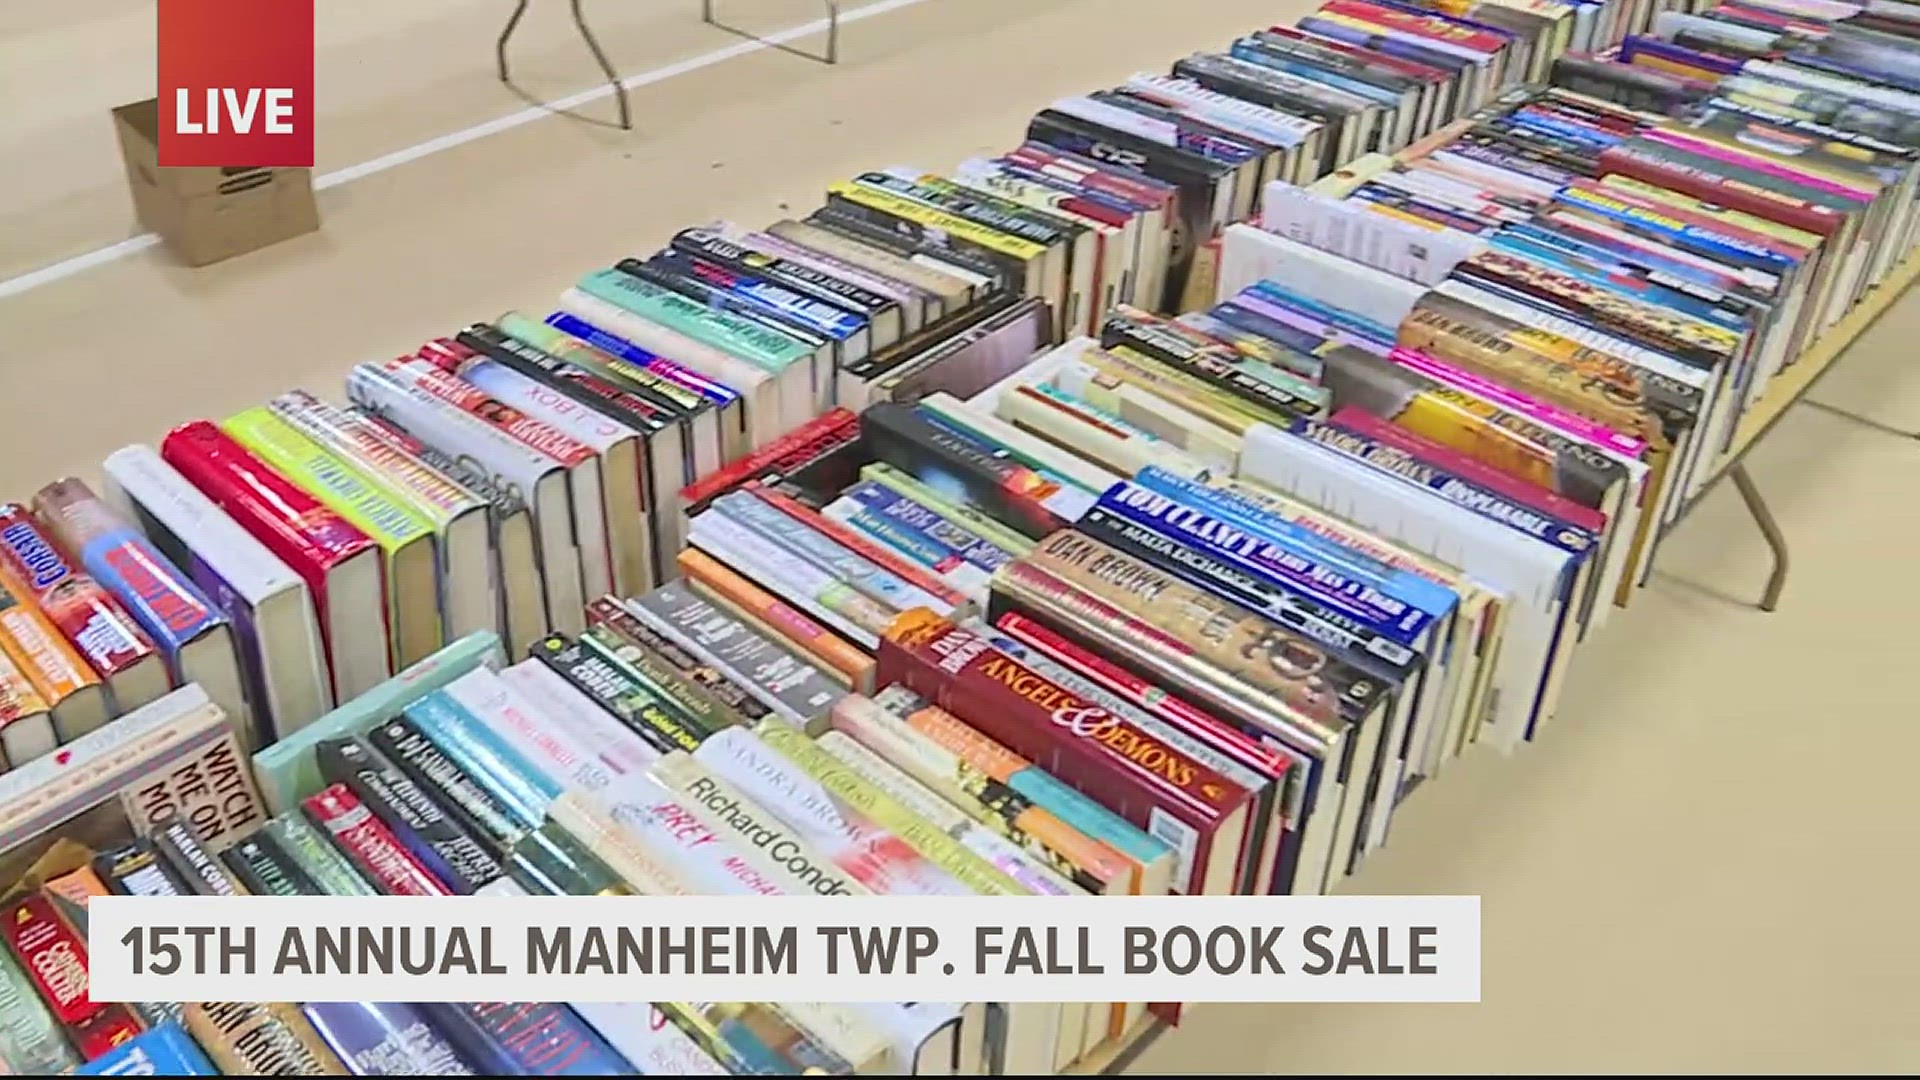 Proceeds from the sale will be used for library materials, programs and equipment.